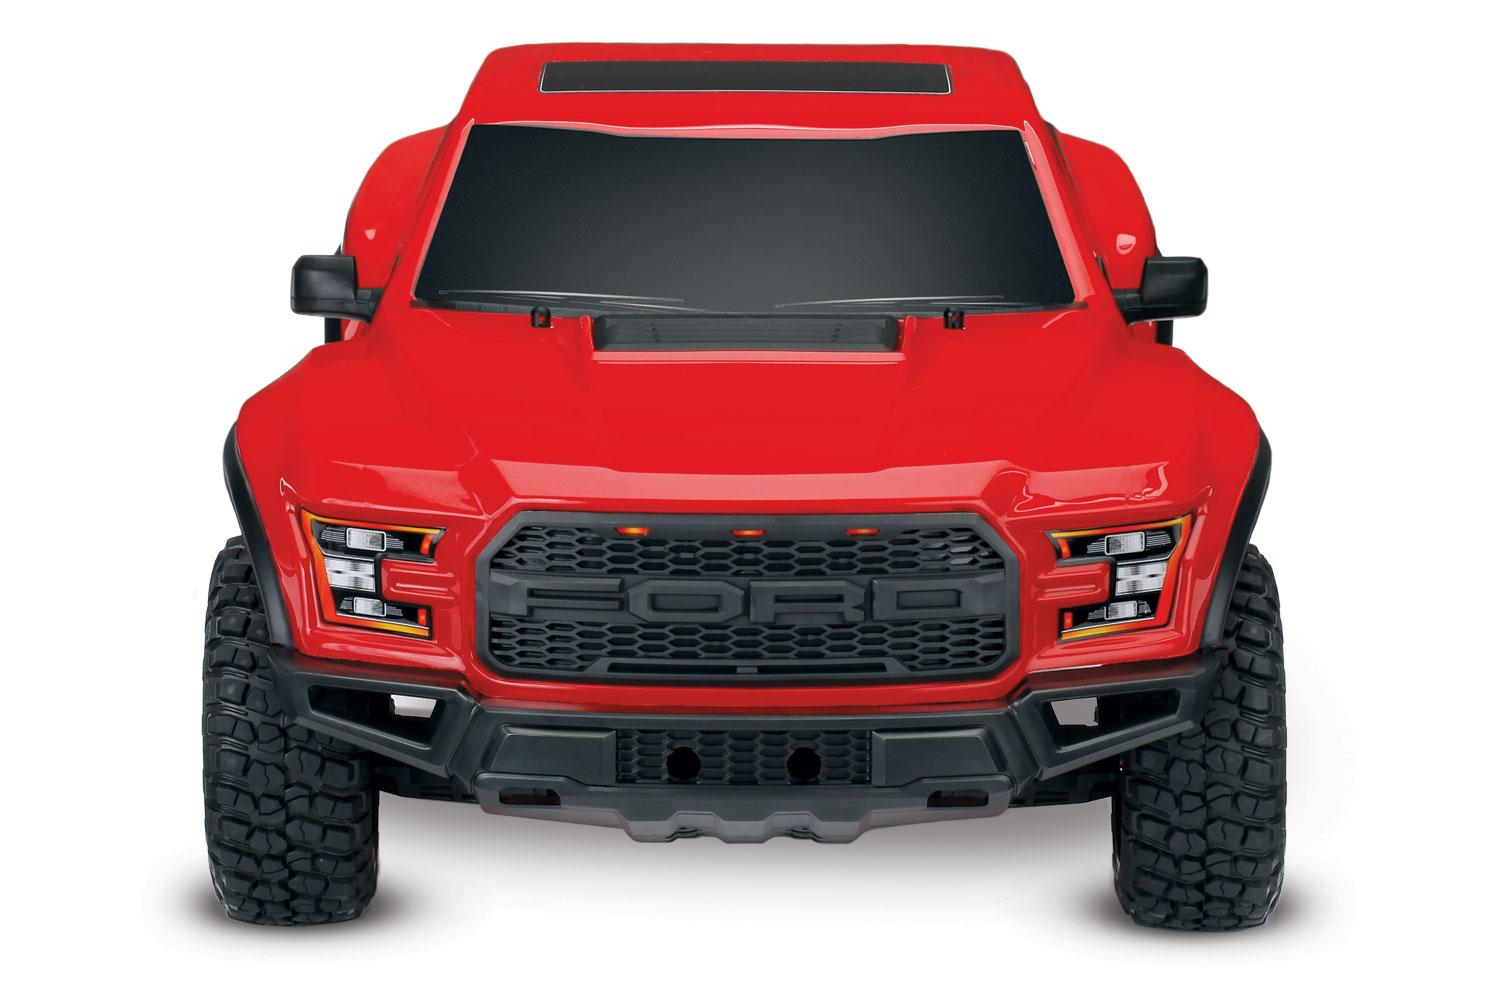 TRAXXAS FORD RAPTOR F-150 ROUGE- 4x2 - 1/10 BRUSHED TQ 2.4GHZ - iD BATTERIE et CHARGEUR